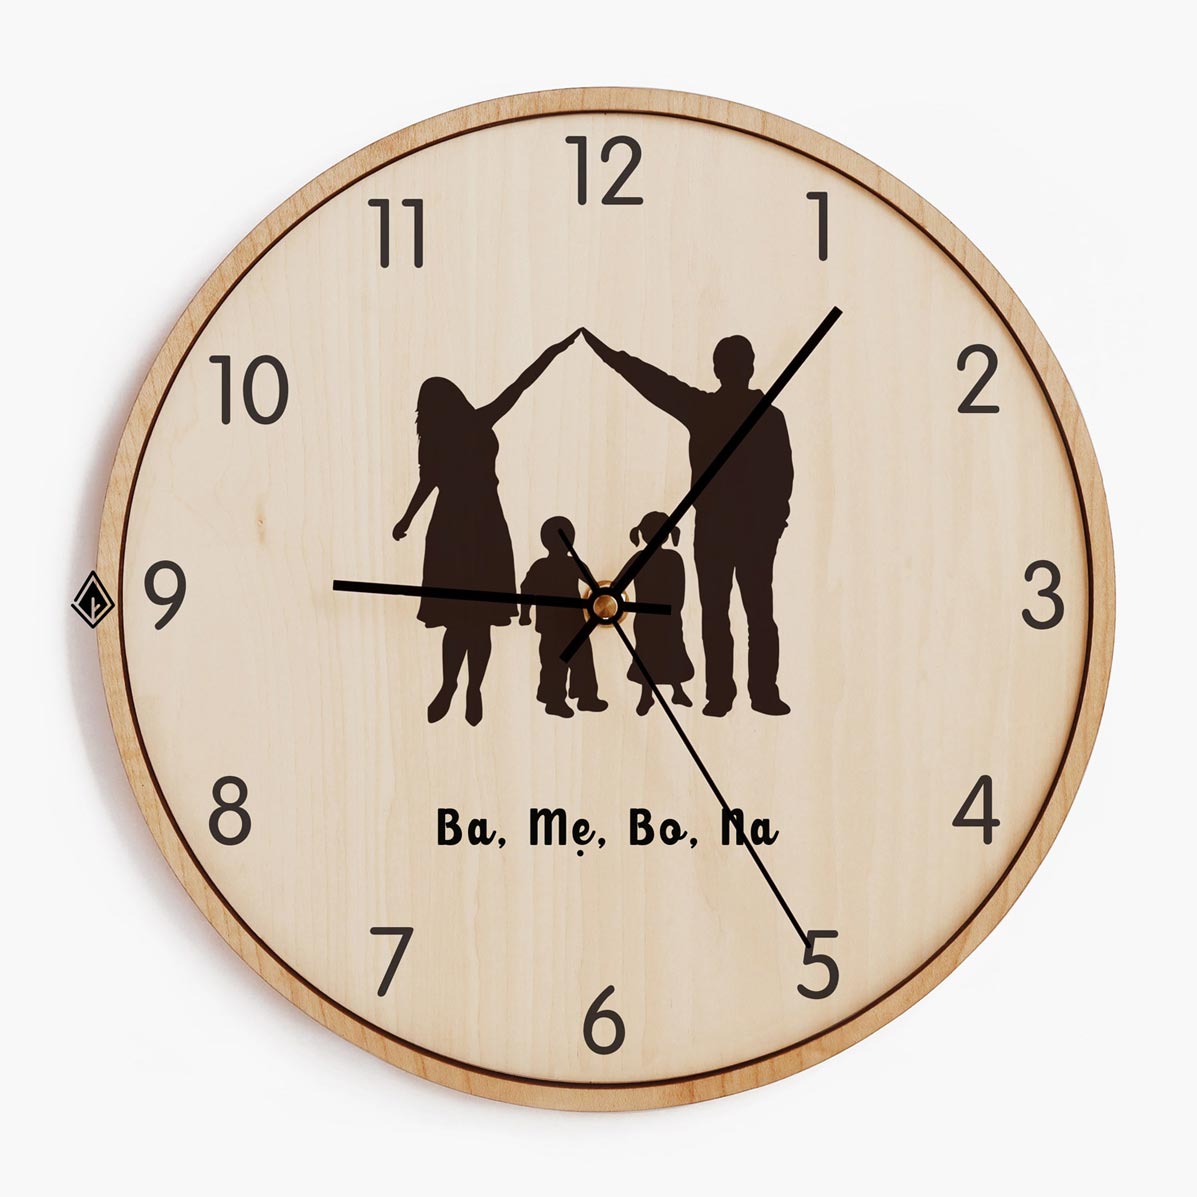 Wooden Wall Clocks Home is where my family is